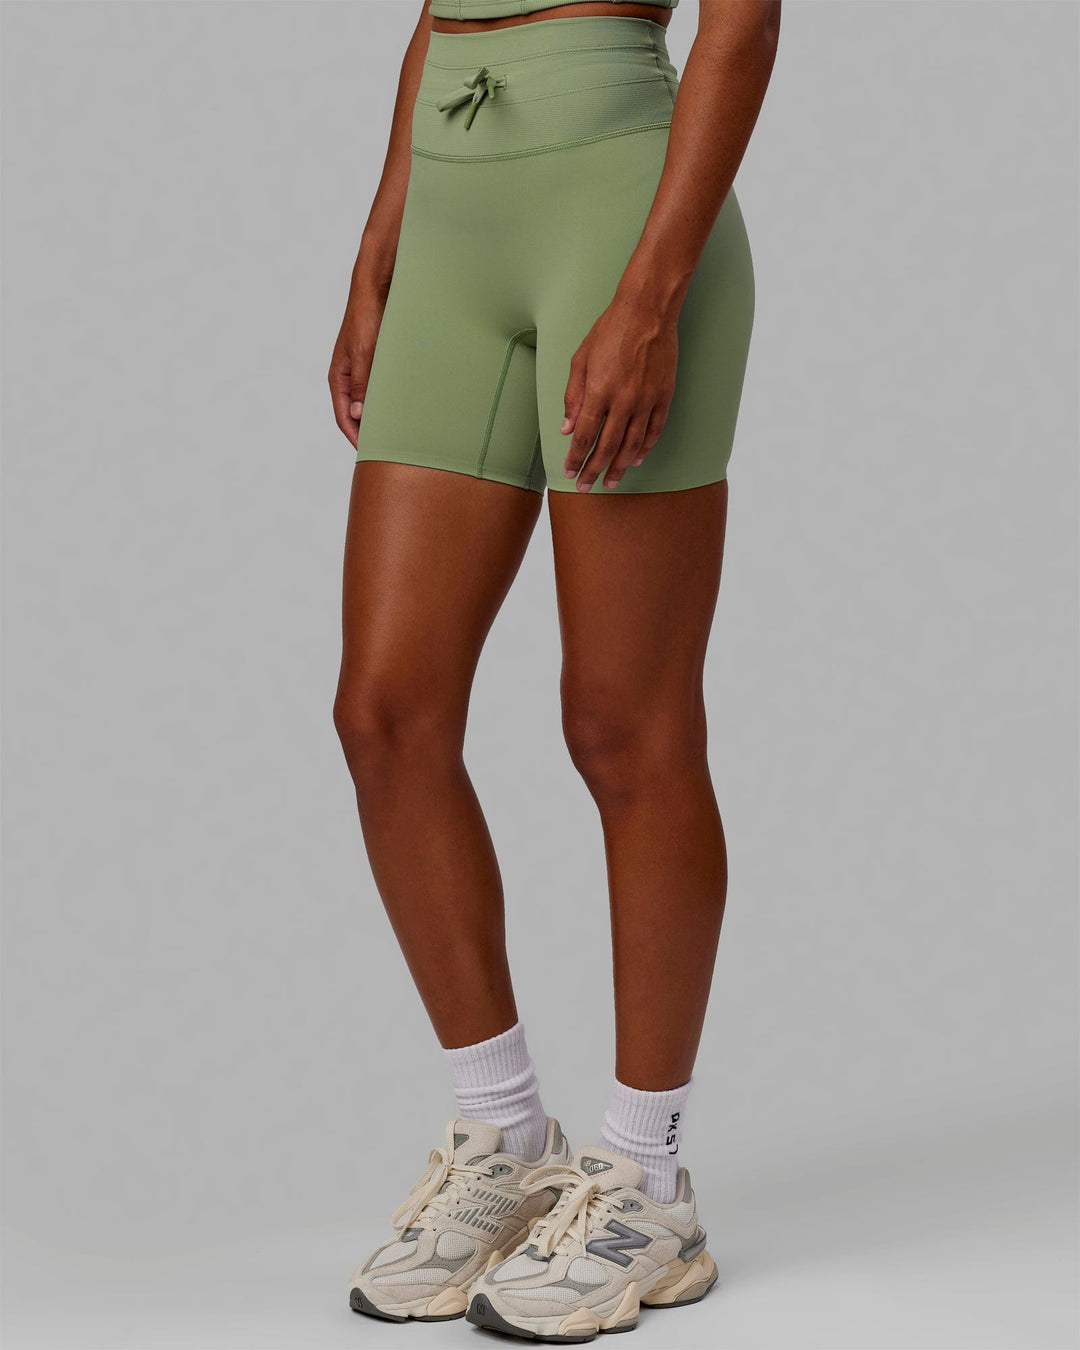 Woman wearing Resistance Mid Short Tights - Bayleaf